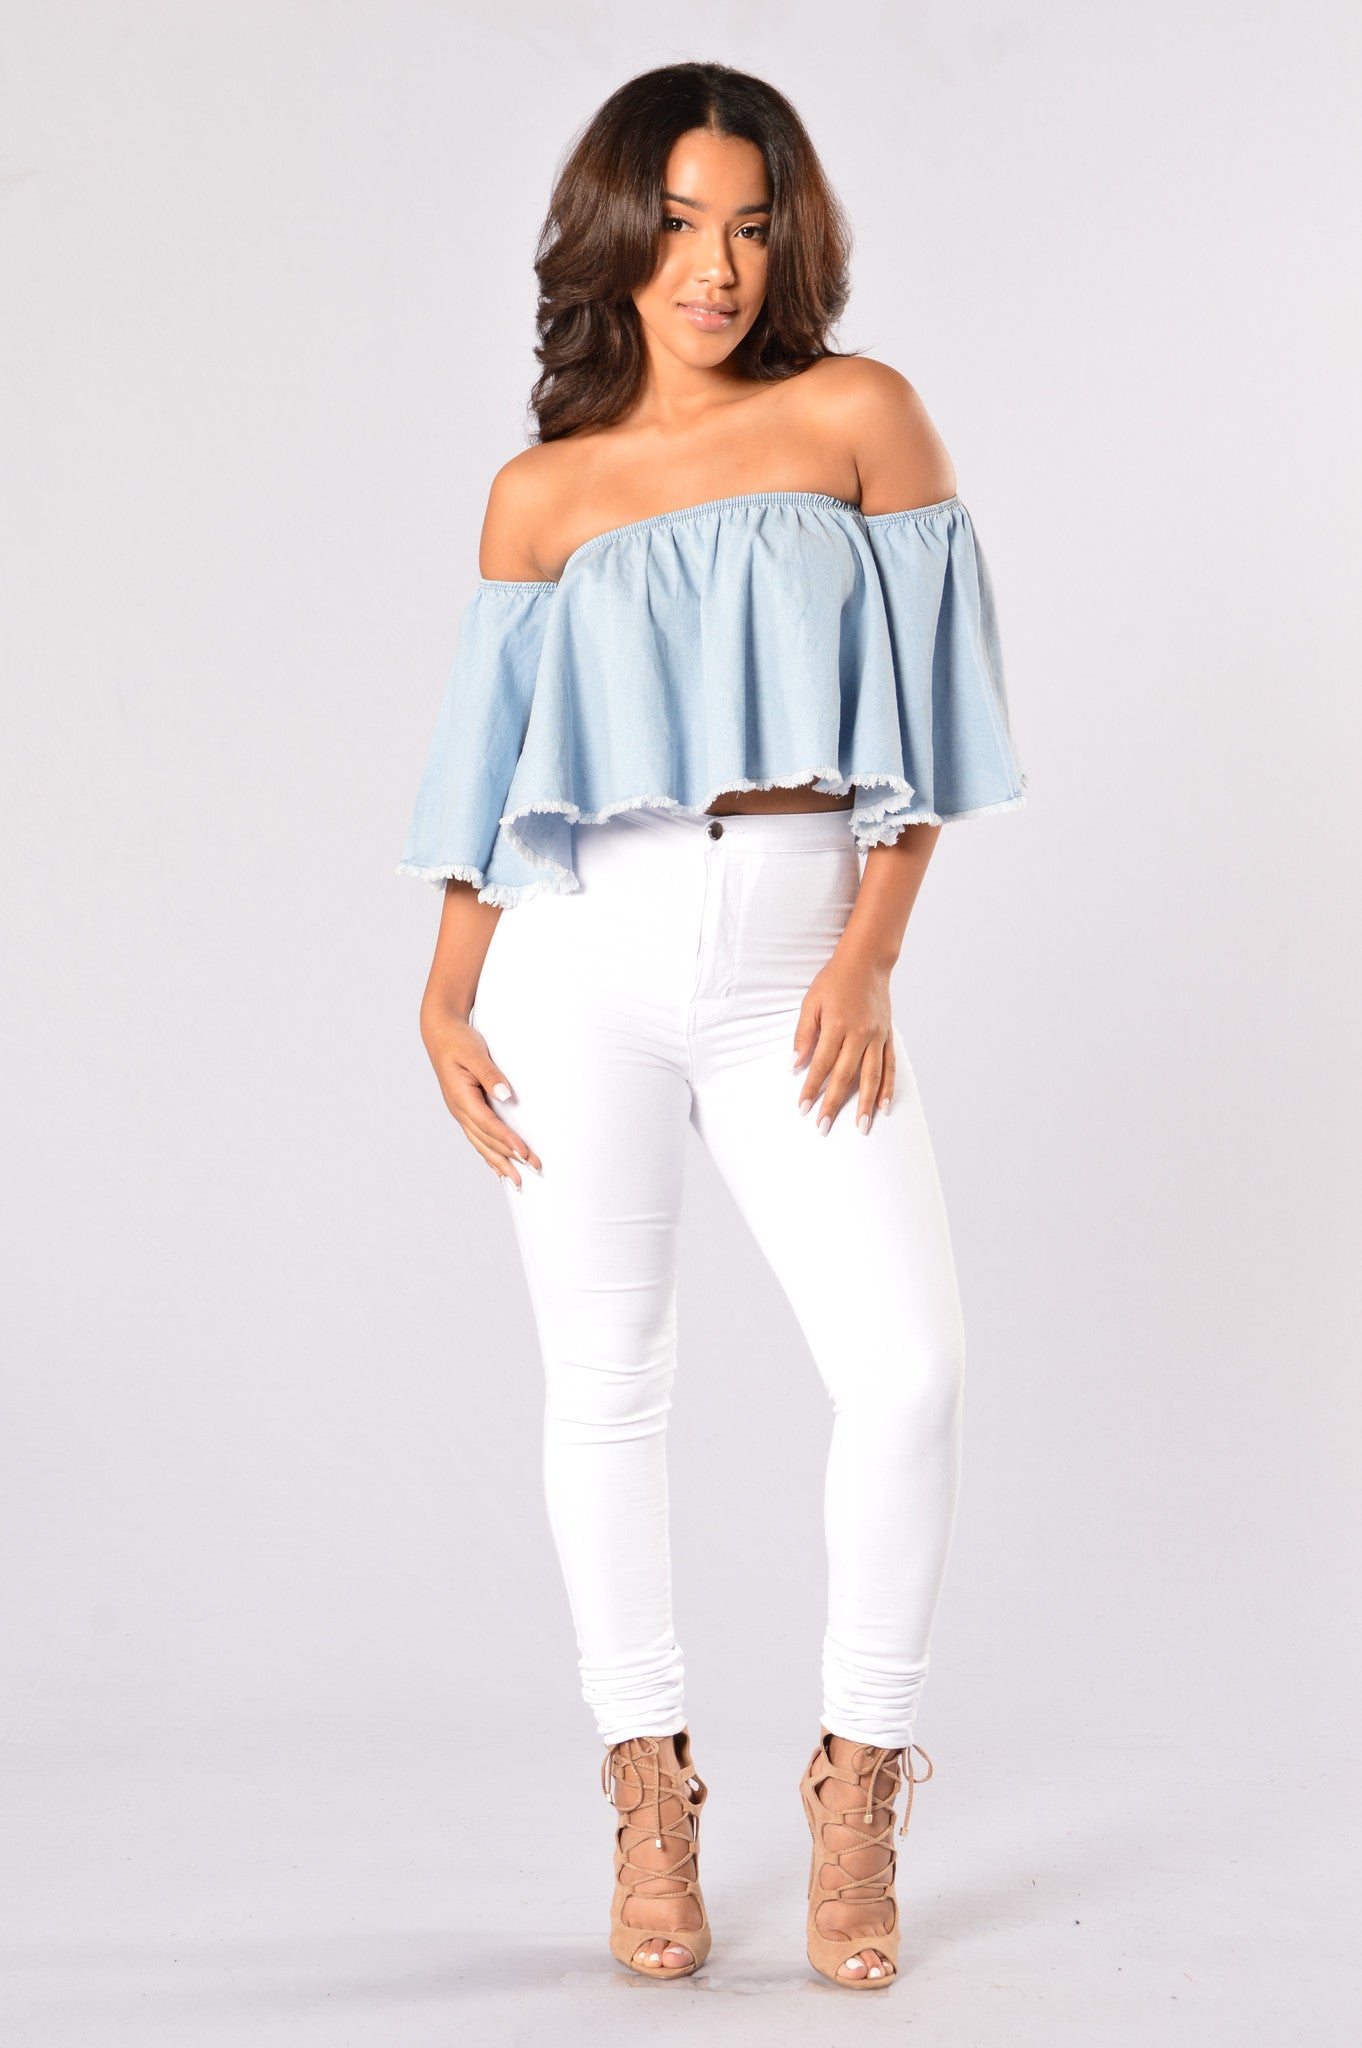 Baby One More Time Top - Light Denim